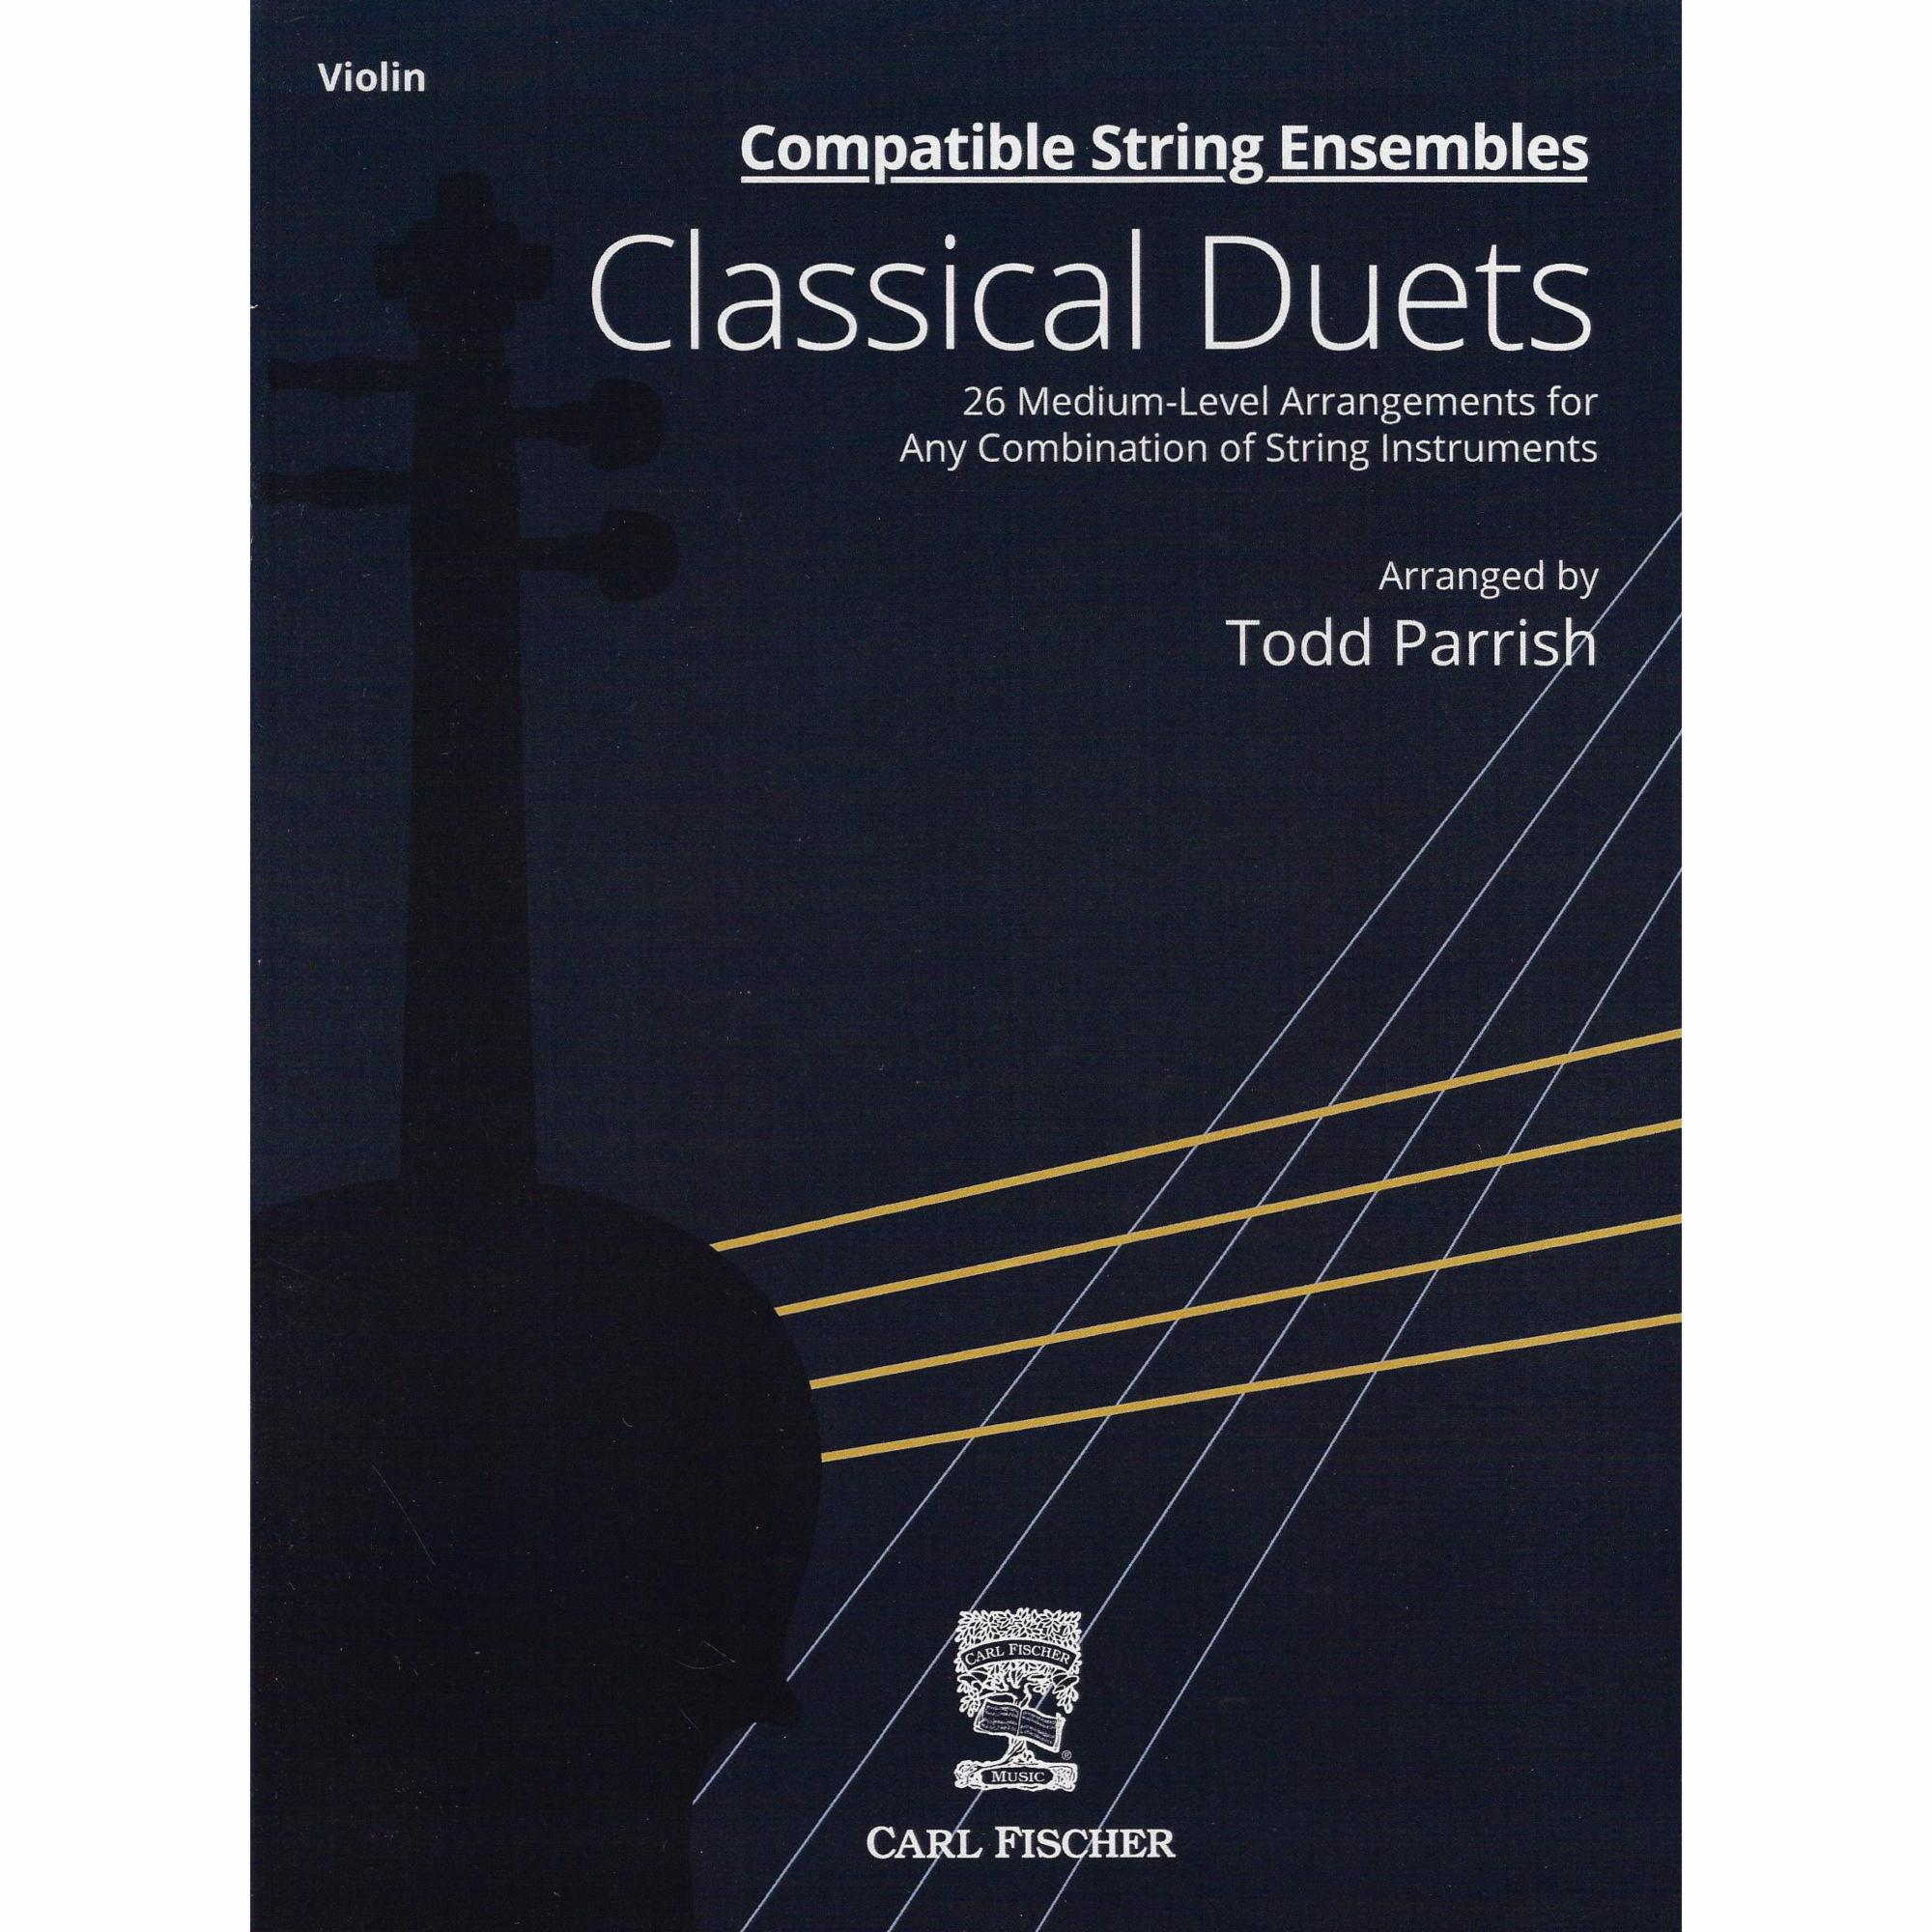 Classical Duets for Violin, Viola, Cello, or Bass